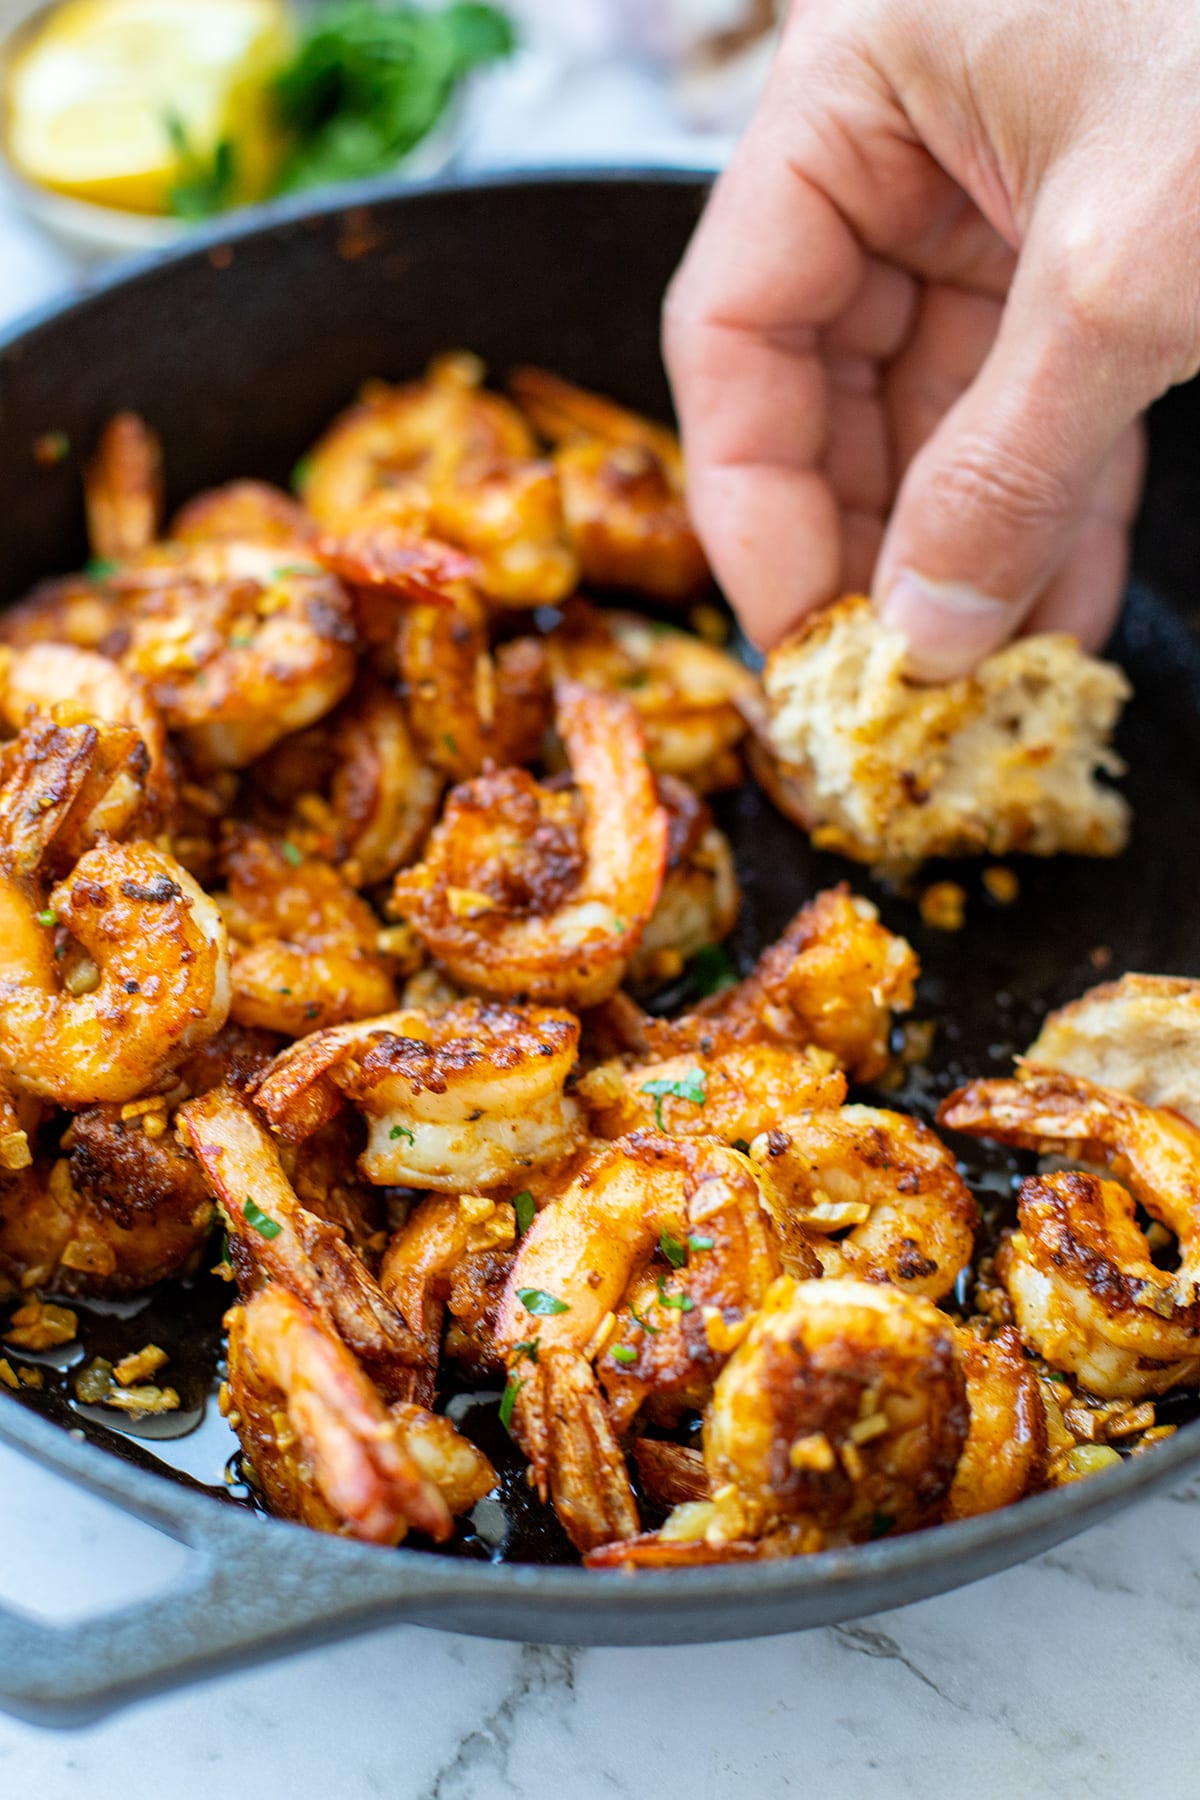 Crispy garlic prawns in a skillet with bread mopping up the sauce.